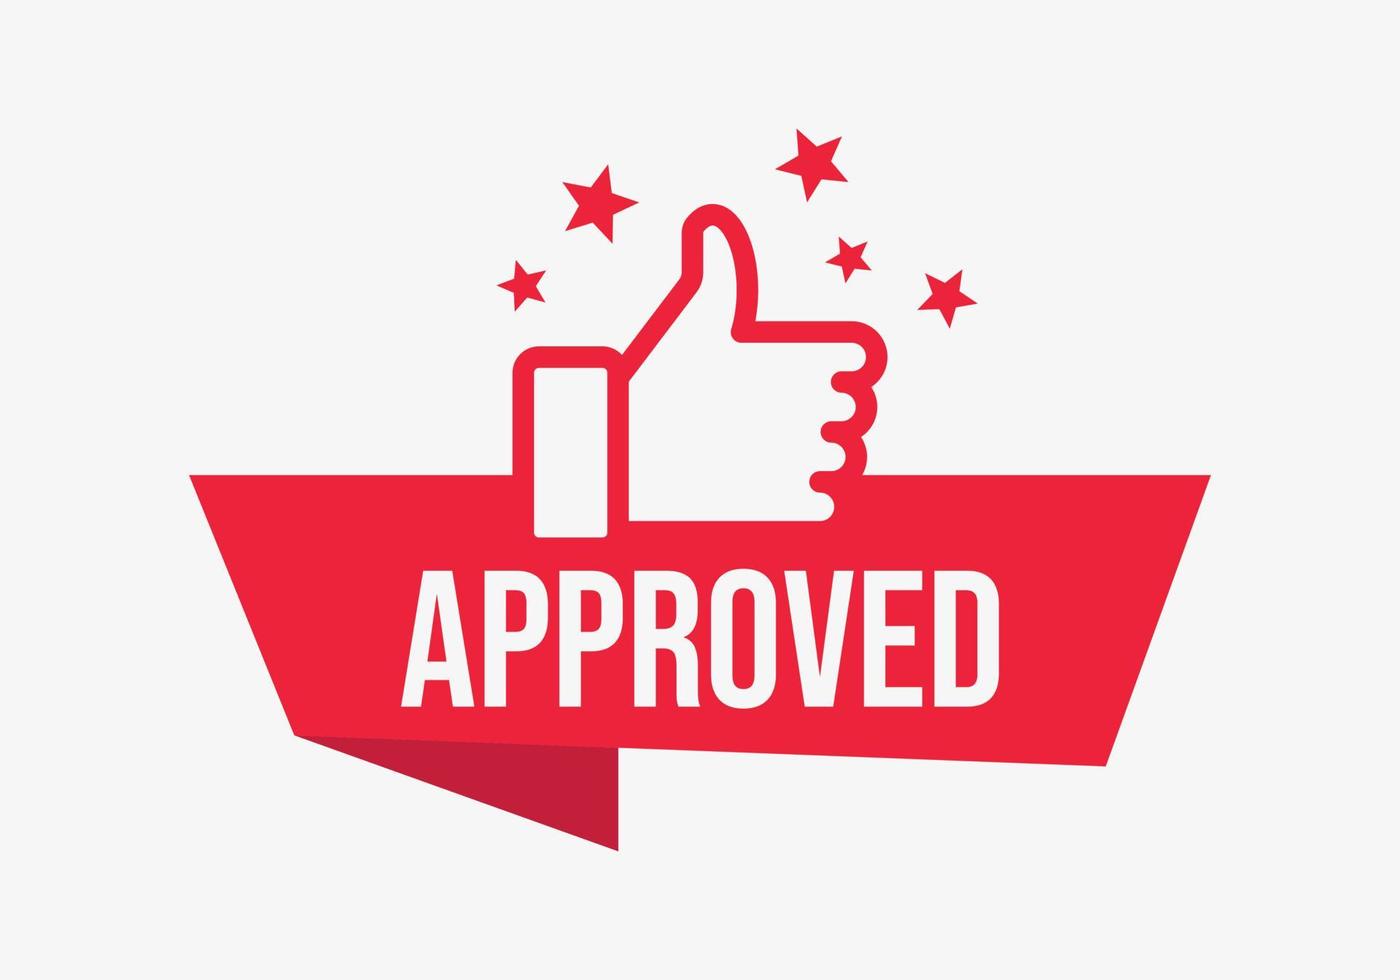 Approved label icon. Vector illustration. Red vector banner with thumbs up and stars